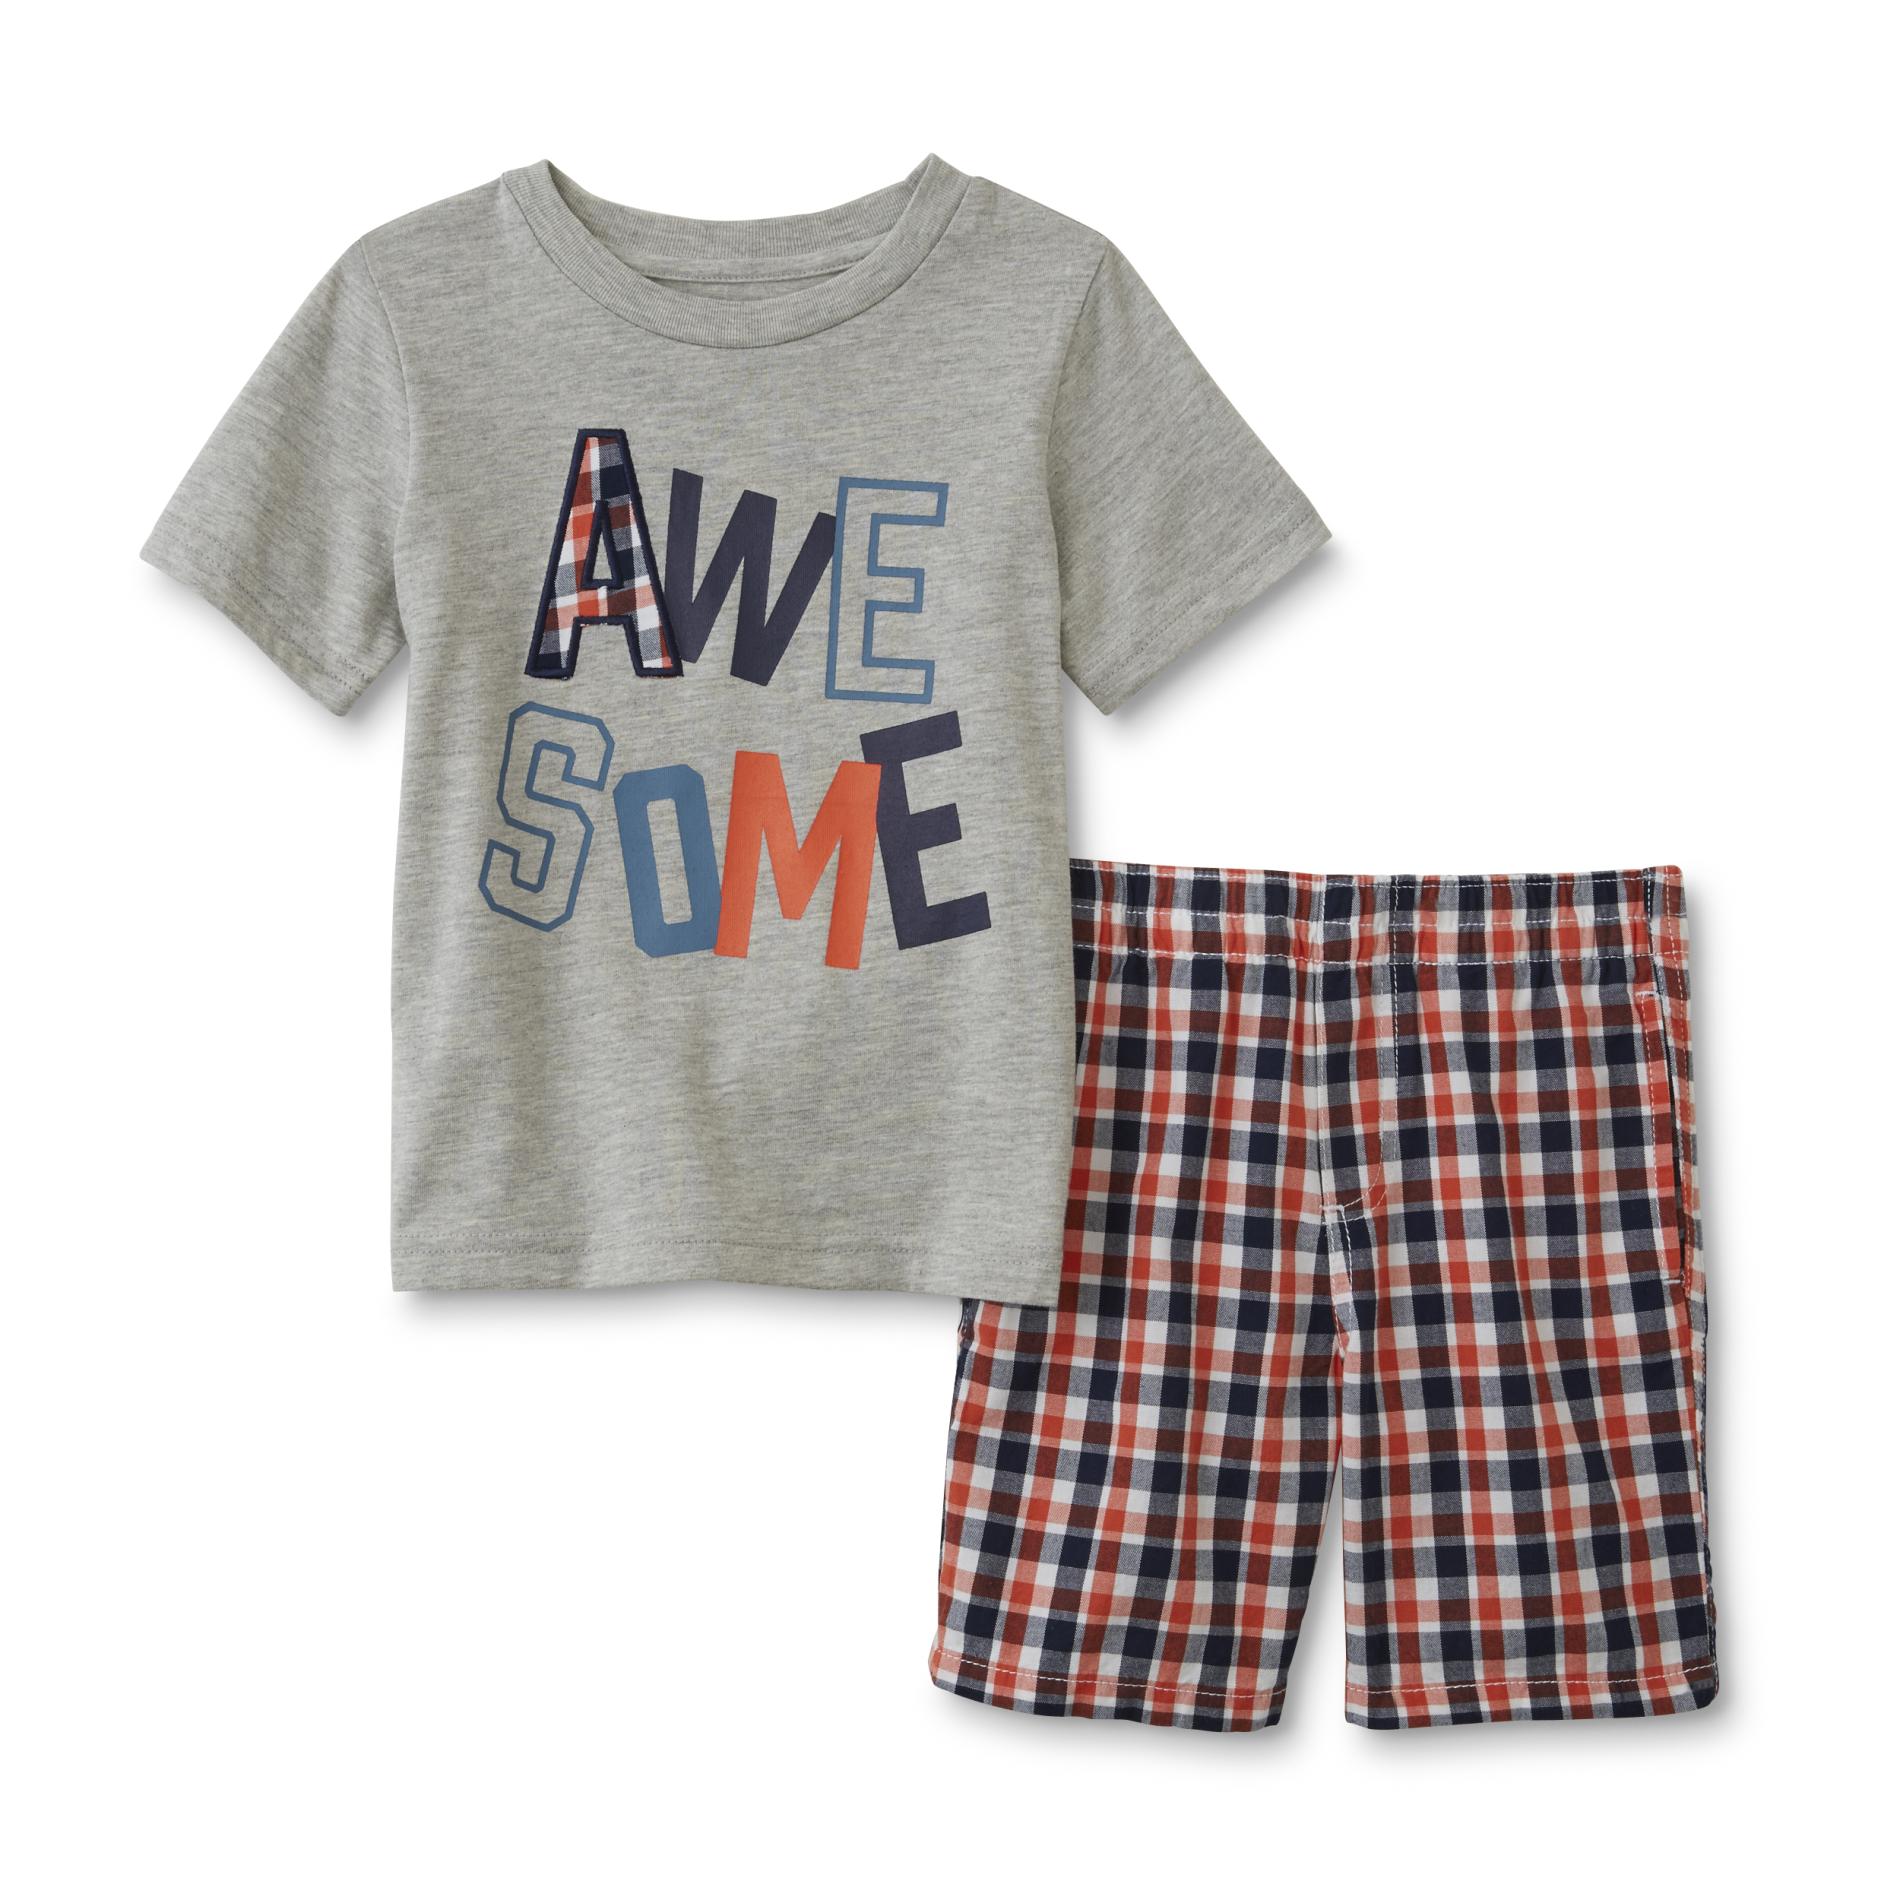 Toughskins Infant & Toddler Boys' Graphic T-Shirt & Shorts - Awesome